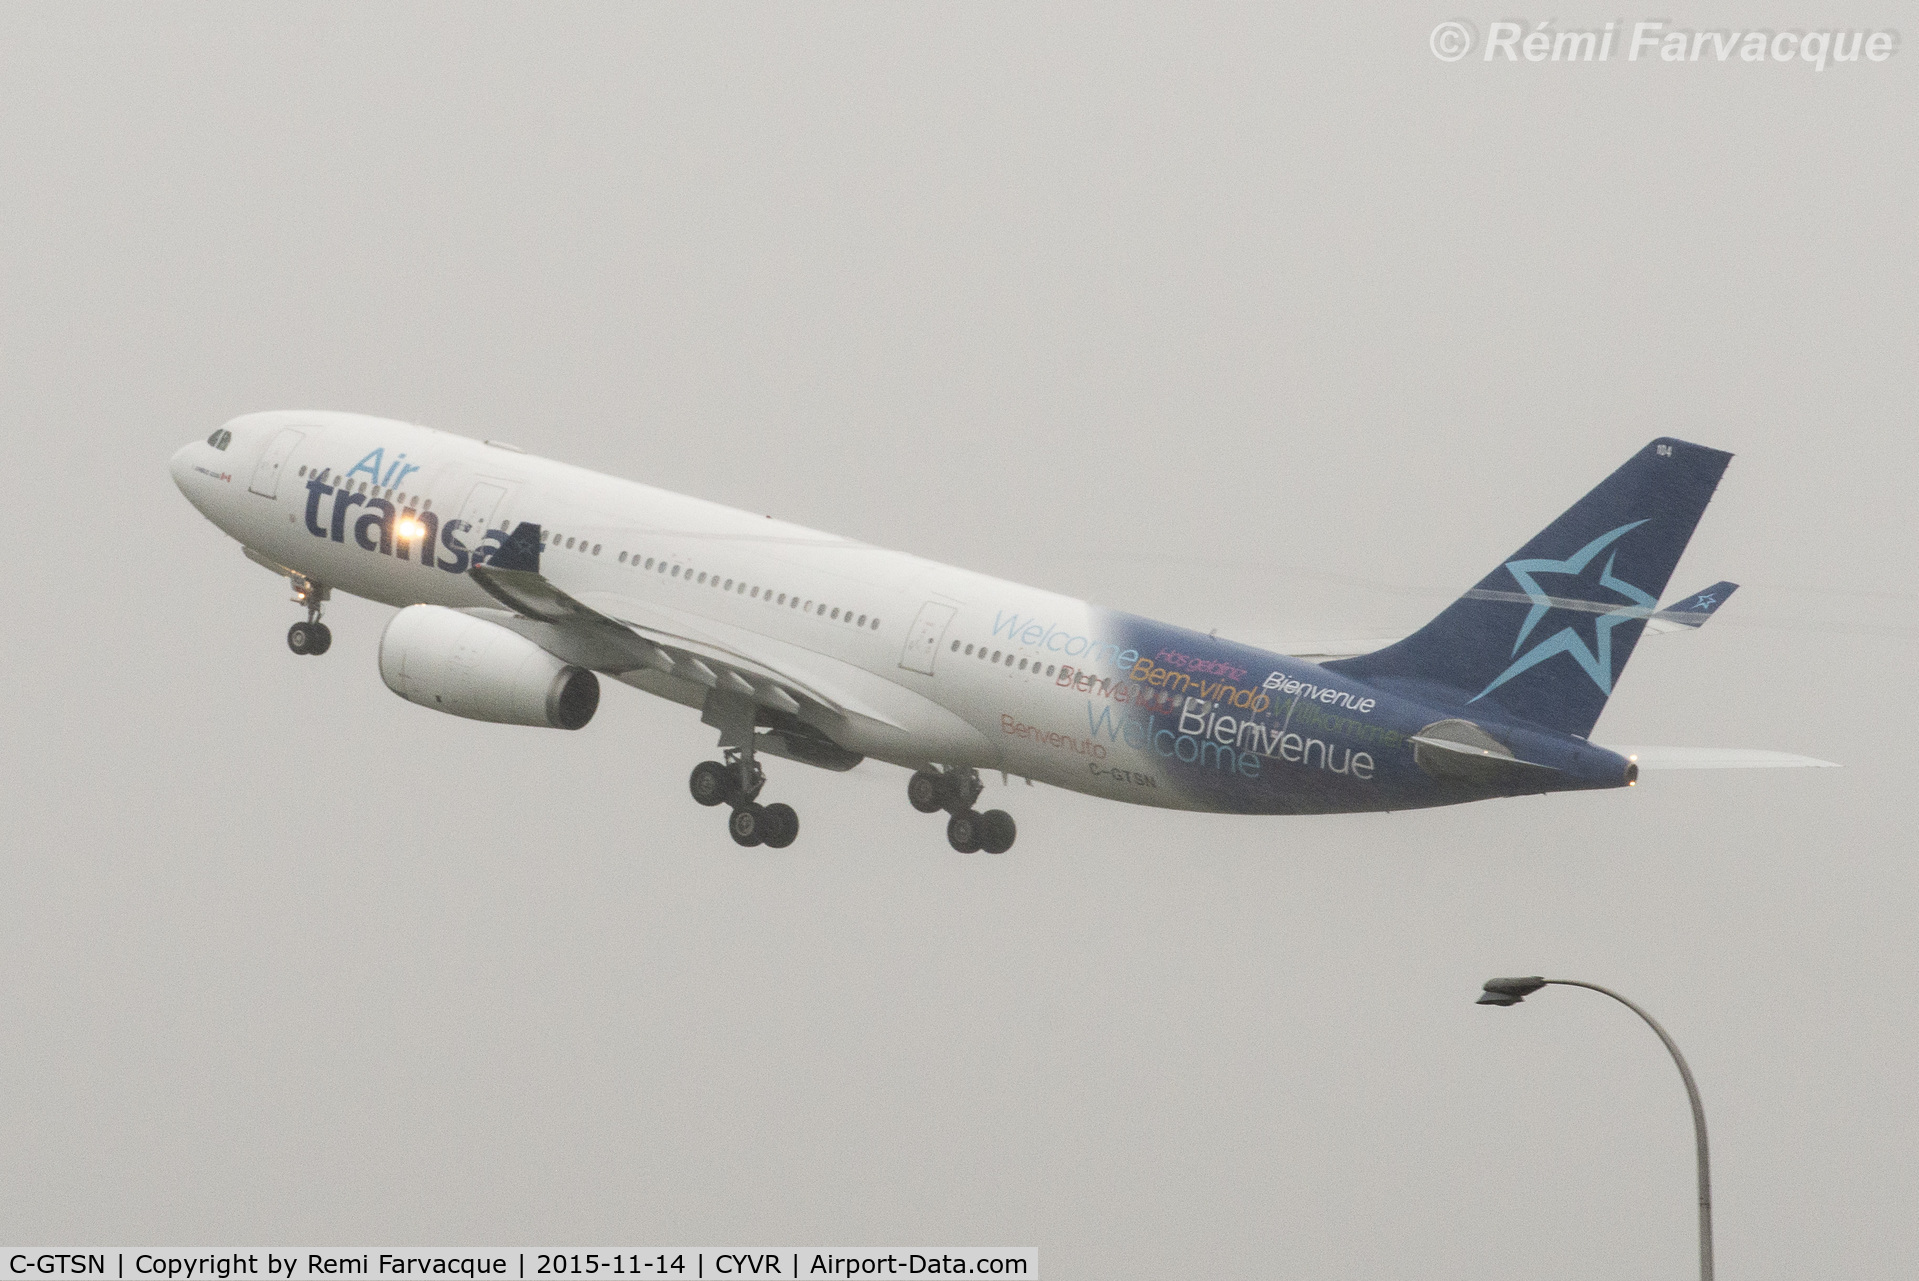 C-GTSN, 2000 Airbus A330-243 C/N 369, Eastbound take-off